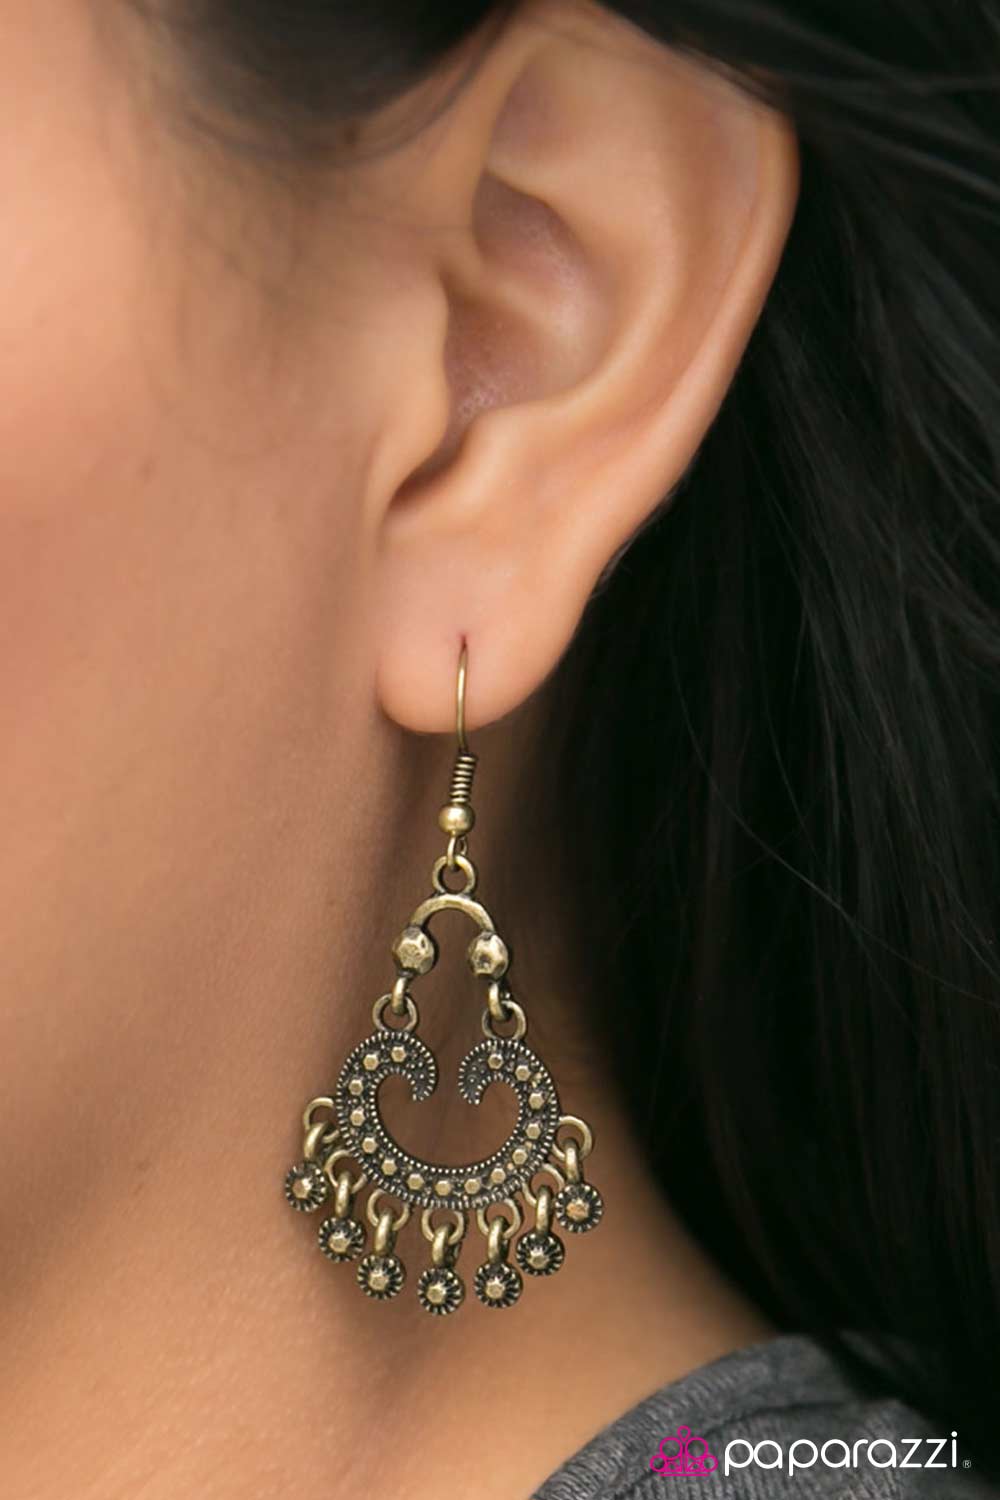 I Will Grant you Three Wishes - brass - Paparazzi earrings